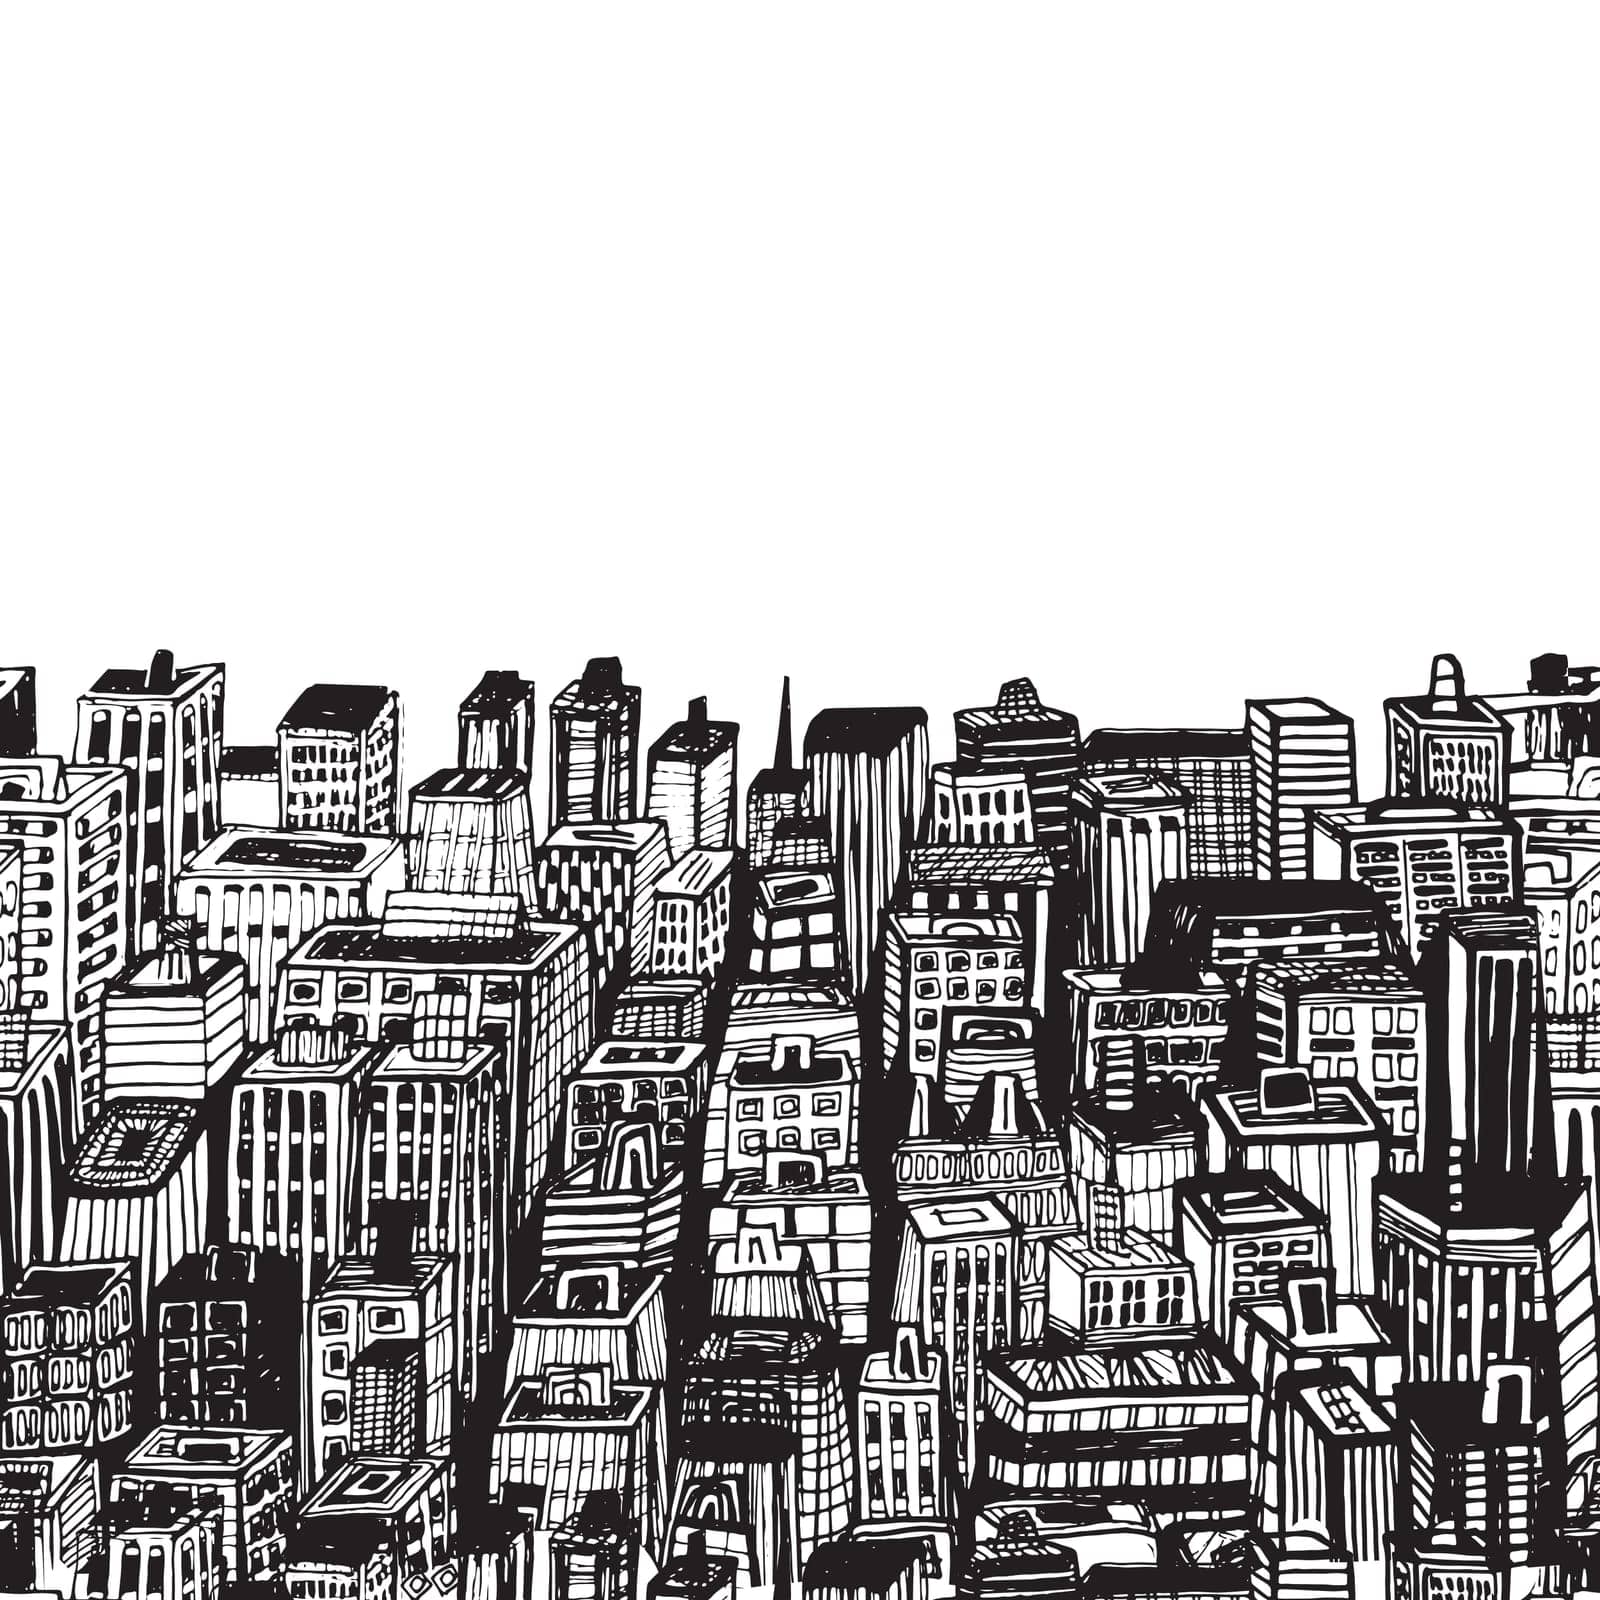 Horizontal banners of big city with skyscrapers. Hand drawn Vintage illustration with New York city NYC, cityscape with panoramic view of architecture, skyscrapers, megapolis, buildings, downtown.